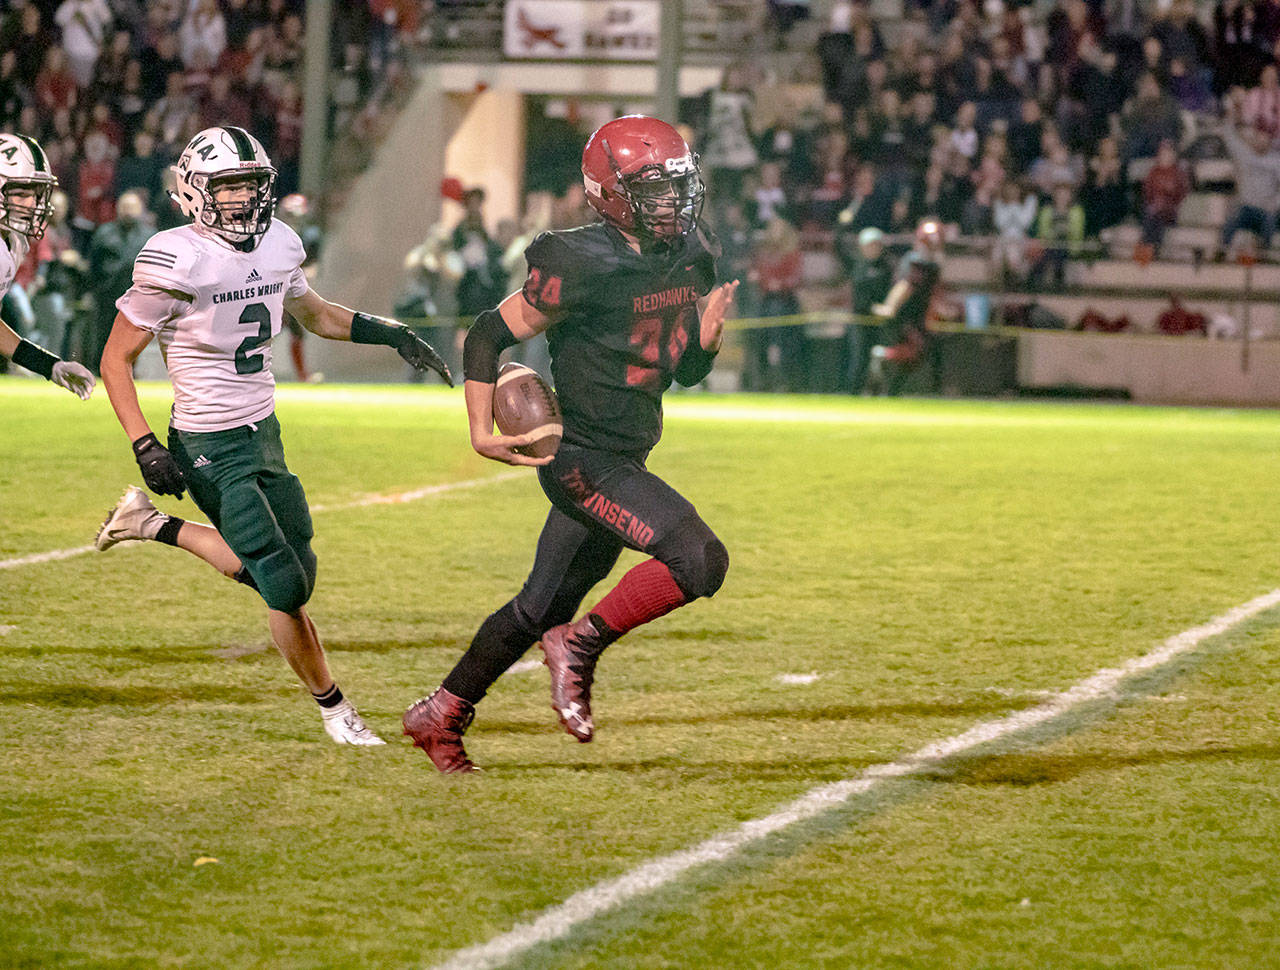 Steve Mullensky/for Peninsula Daily News Port Townsend’s Dylan Tracer runs past the final Charles Wright defender on his way to a 99-yard kickoff return touchdown during a win earlier this season.